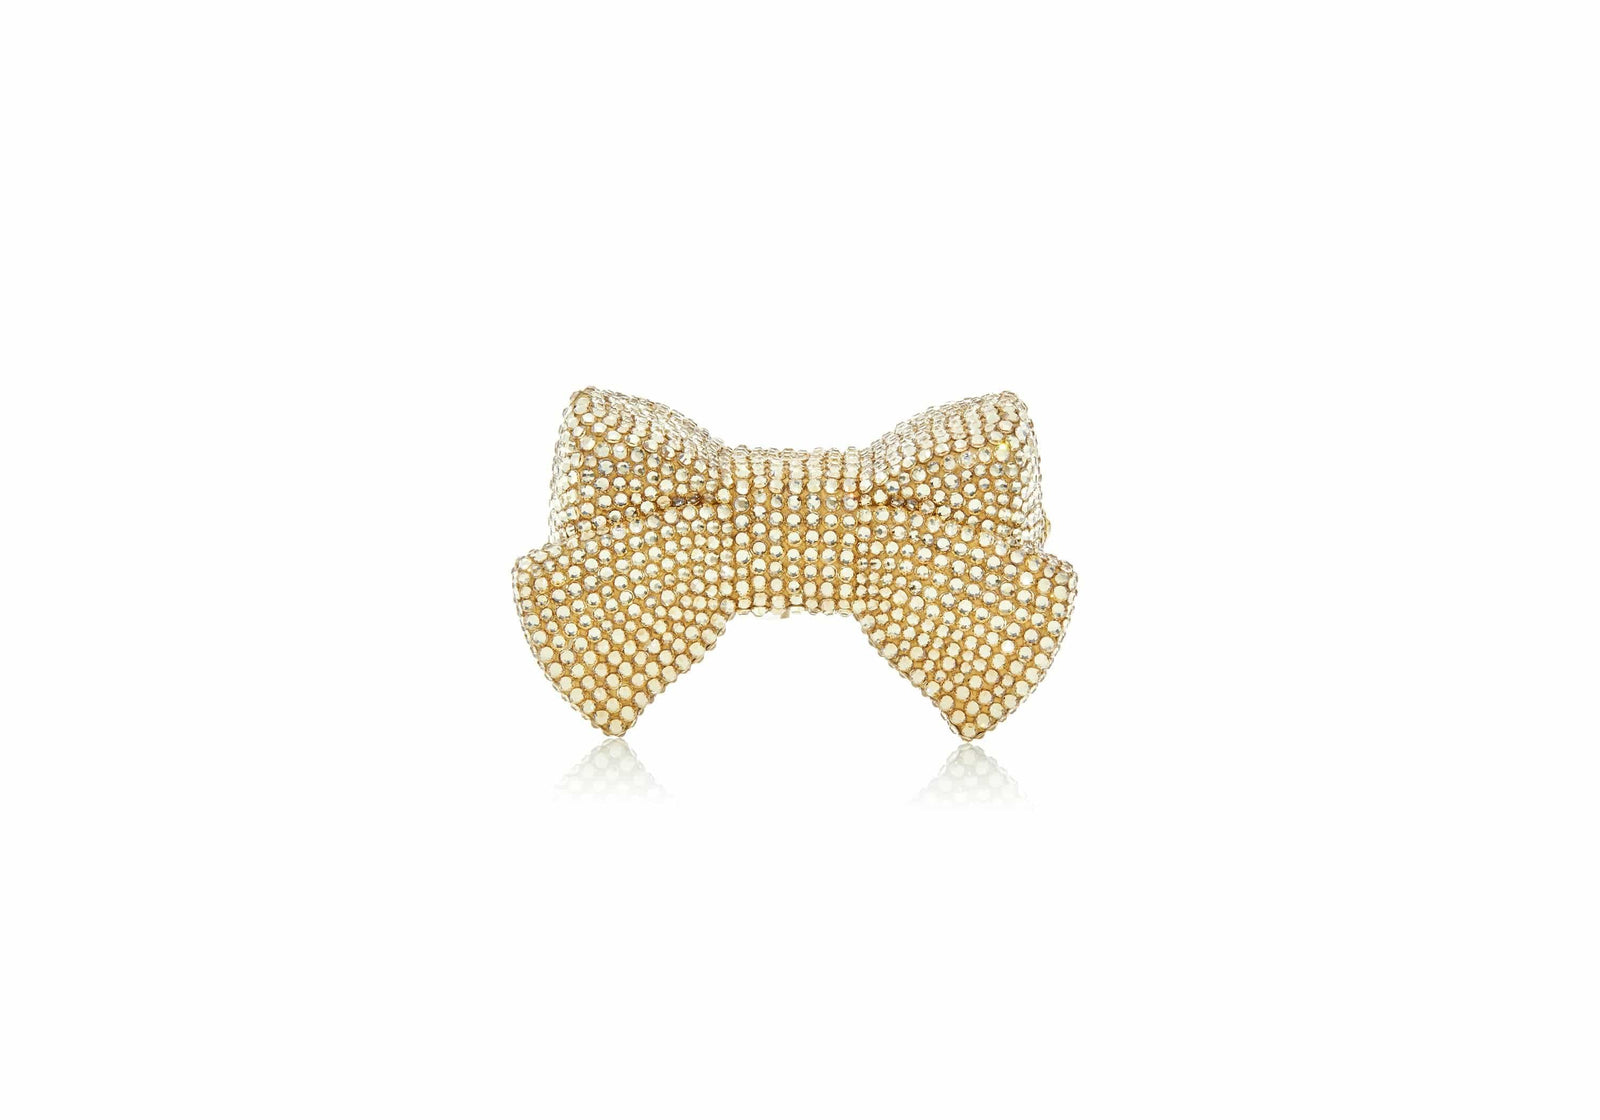 Judith Leiber Couture Women's Bow Crystal Pillbox